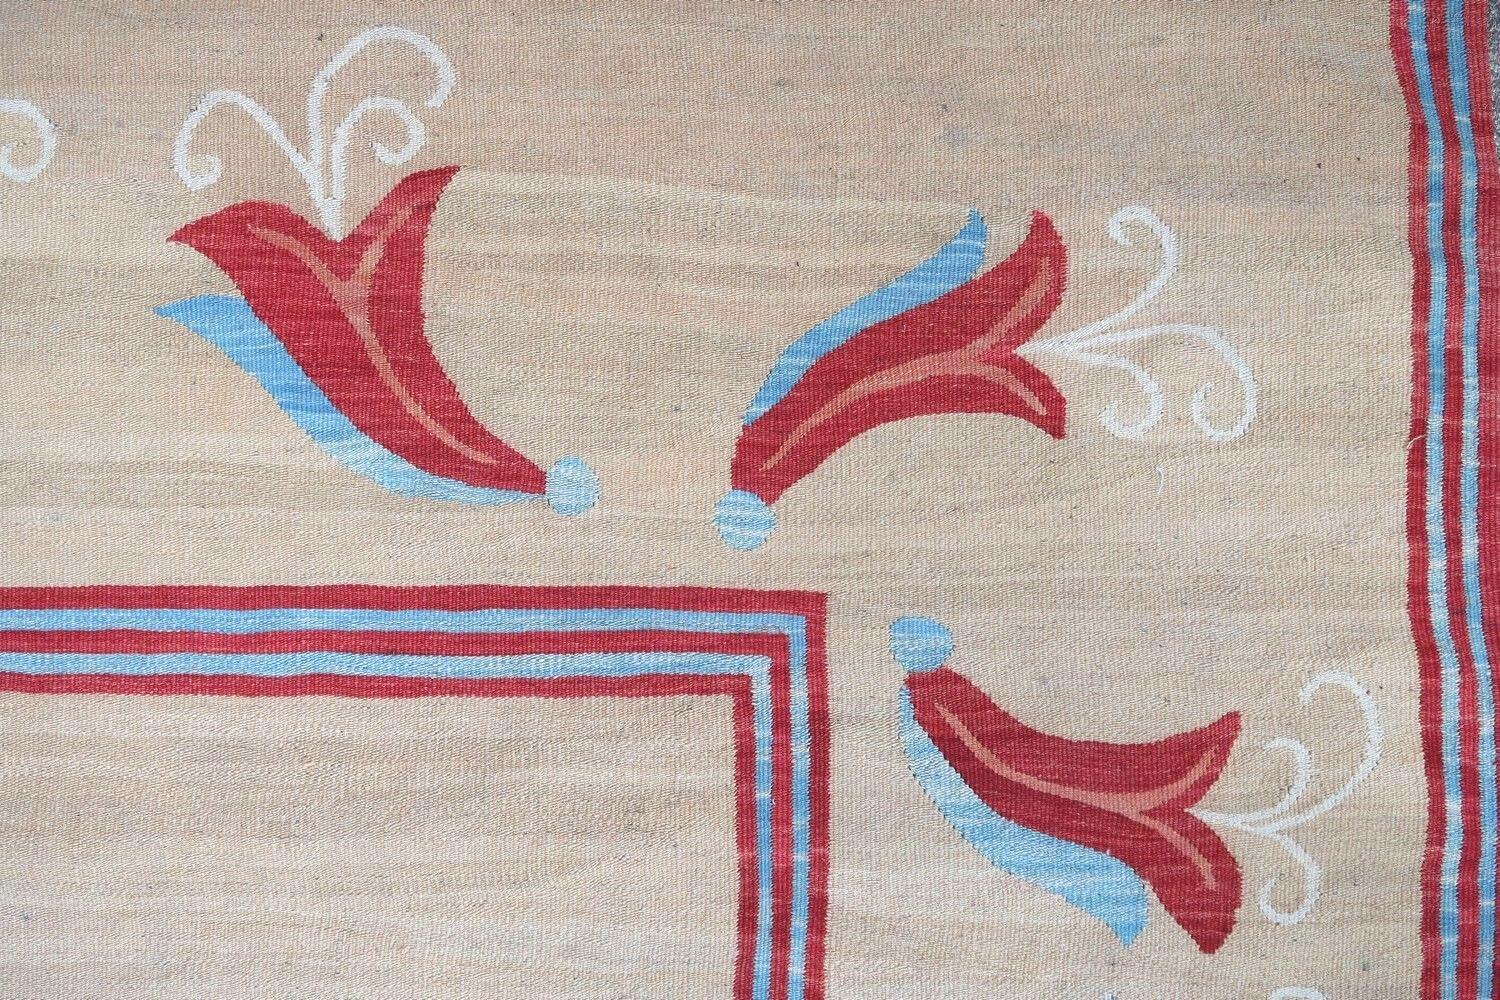 Handmade vintage Bessarabian kilim from Romania in cream beige and red colors. Vegetable dyes, the rug is in original good condition, made in the mid-20th century.

- Condition: original good, 

- circa 1950s,

- Size: 5.9' x 9.6' (180cm x